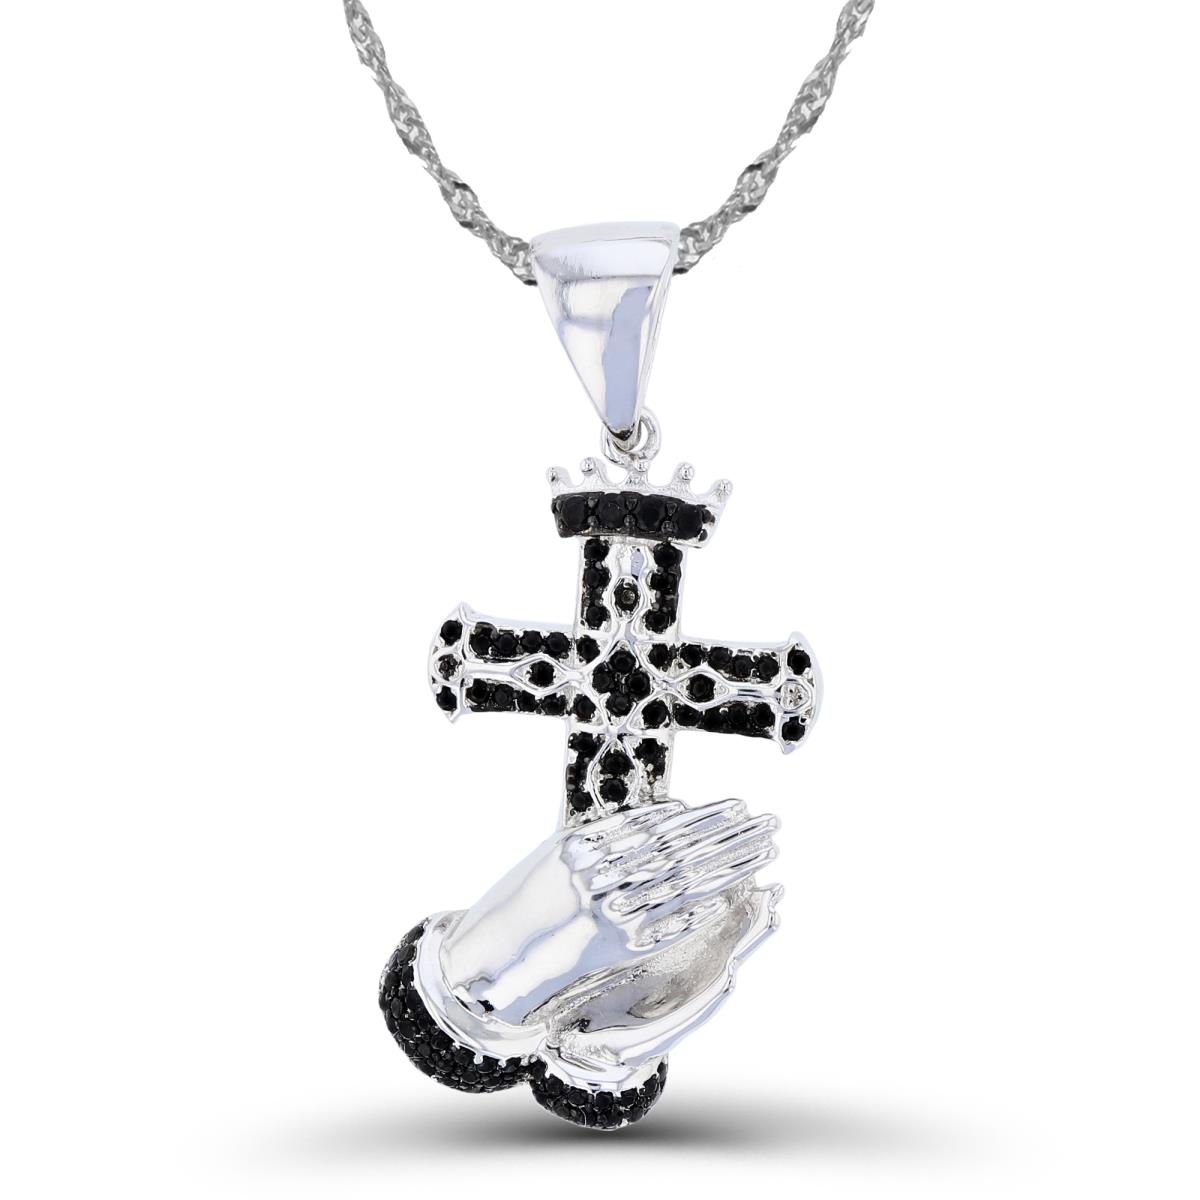 Sterling Silver Two-Tone (B/W) High Polish & Textured Rnd Black Spinel Praying Hands with Cross 18"+2" Singapore Necklace